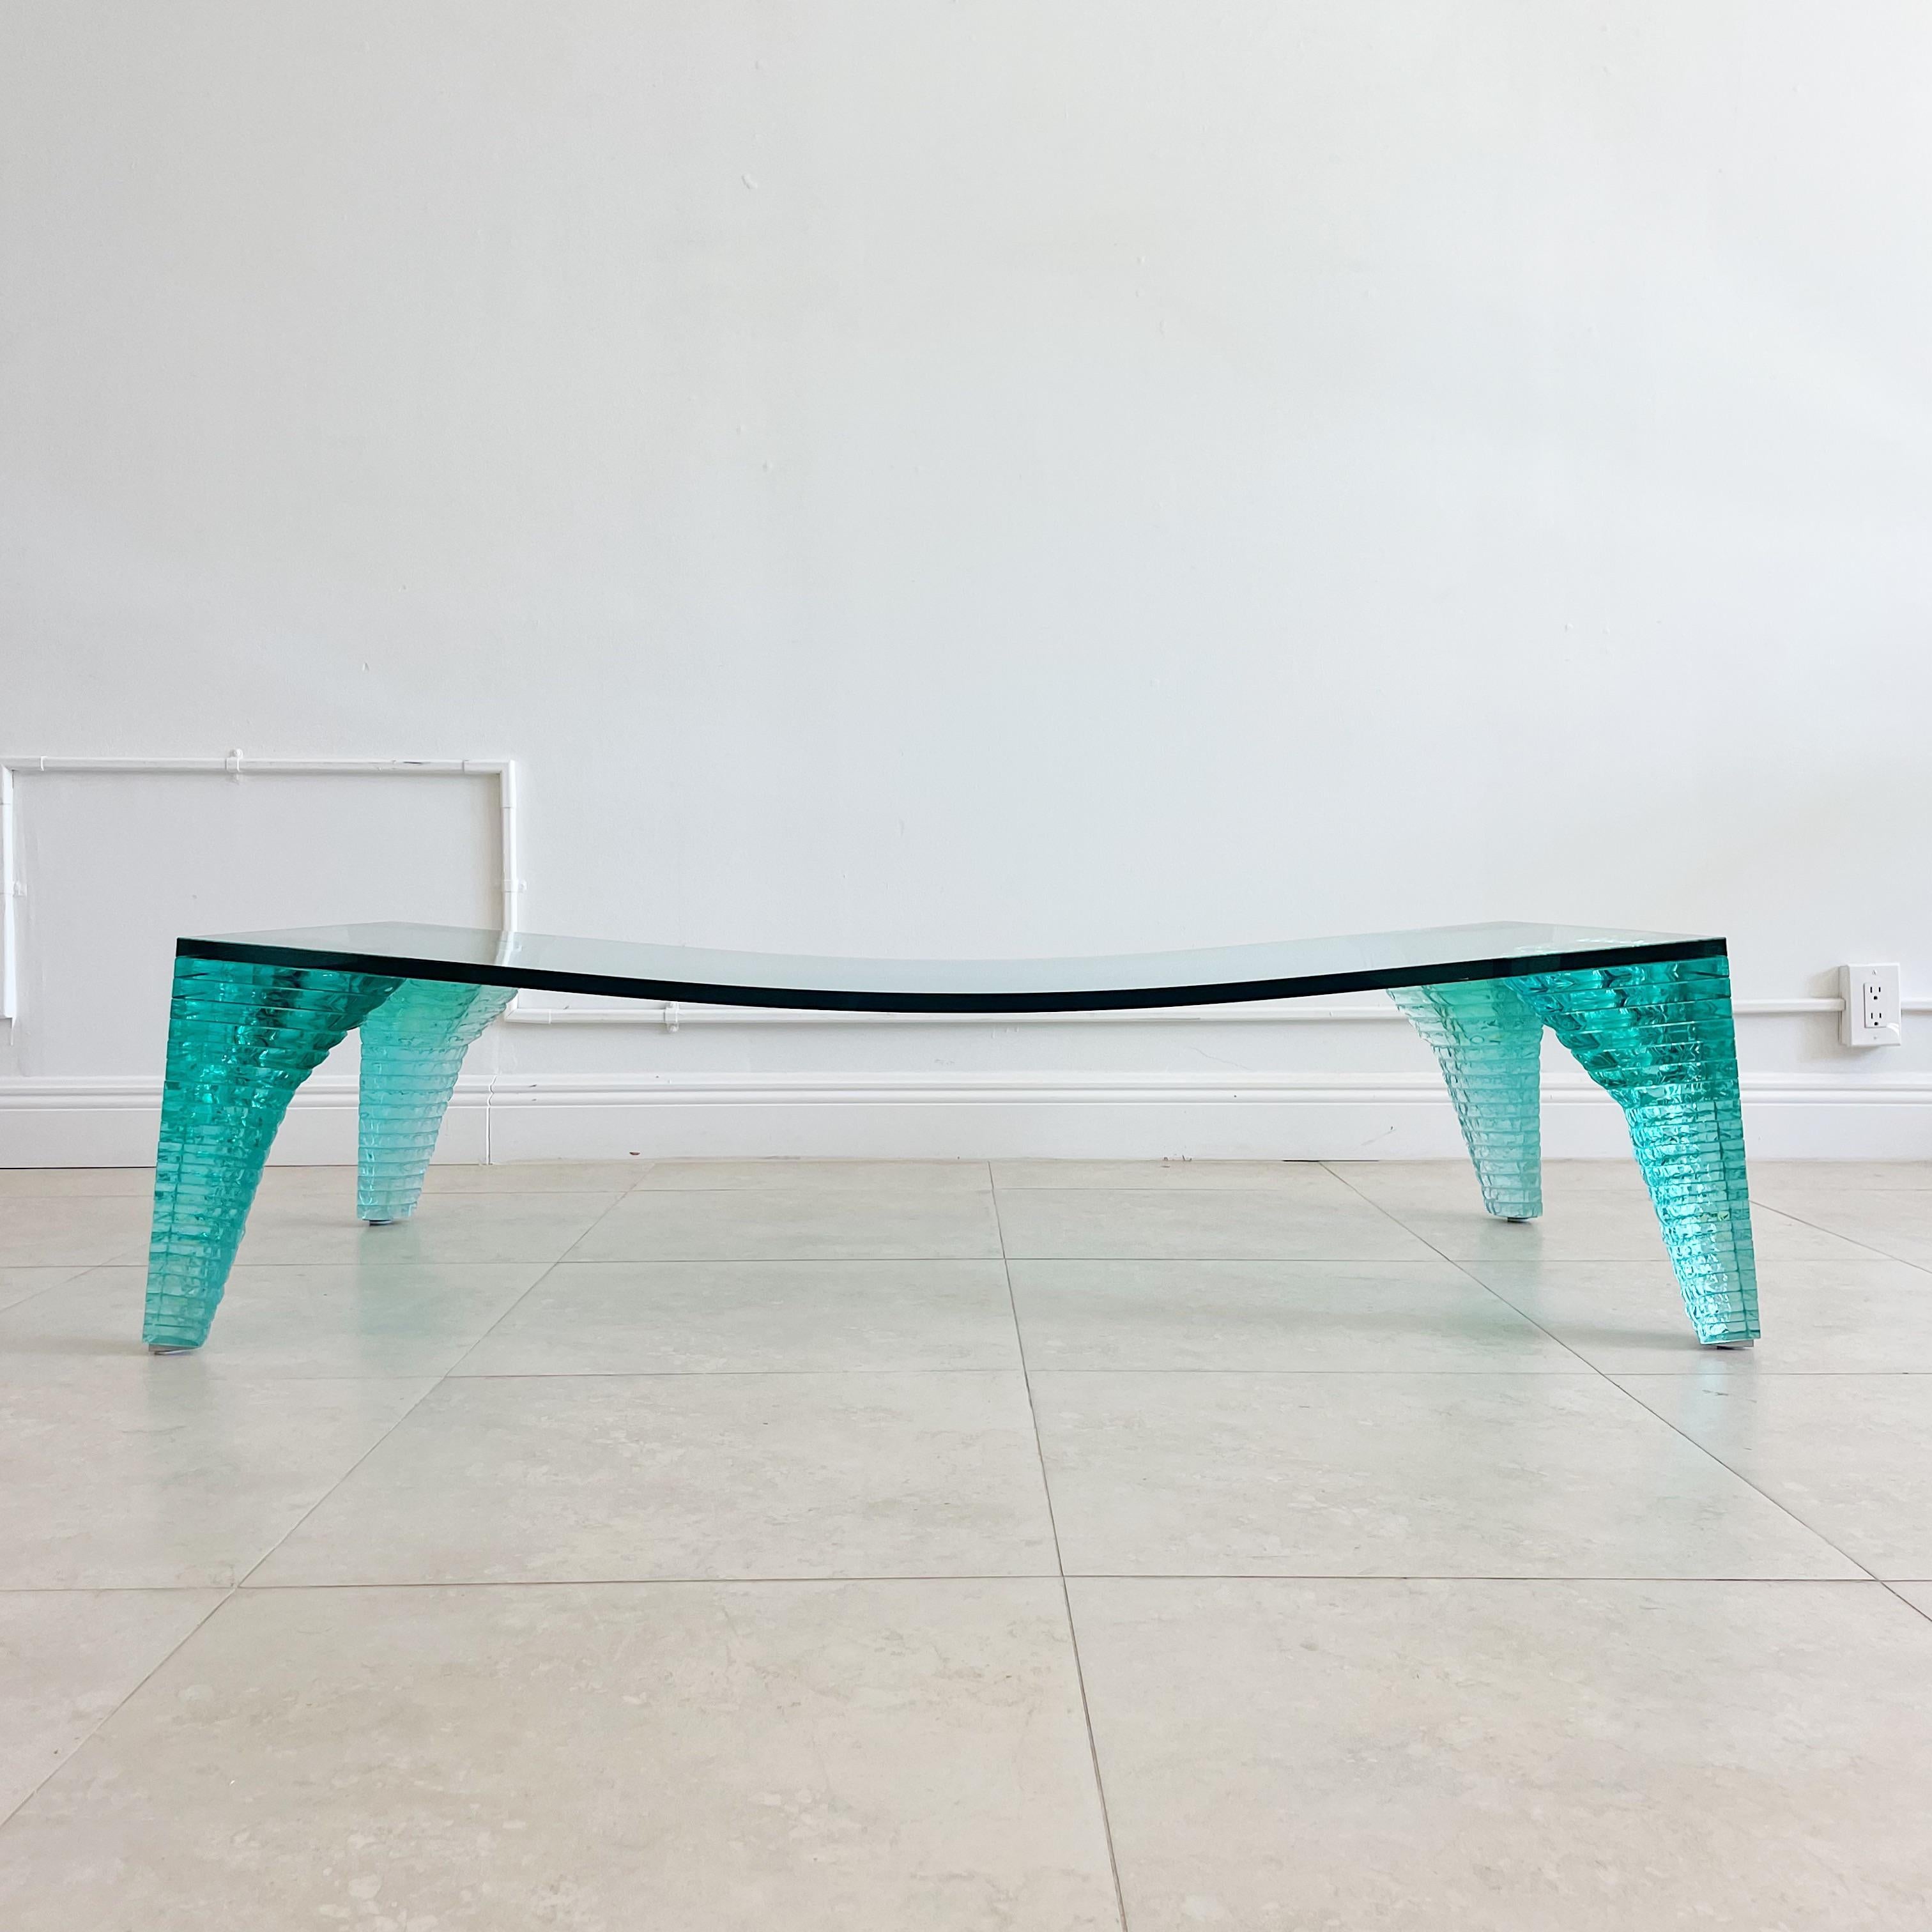 A Danny Lane “Atlas” coffee table. A clear green piece of concave glass set on four graduating stacked glass legs. Designed by Danny Lane for Fiam. Italy, circa 1980. 
Danny Lane (born 27 January 1955) is an American artist, best known for his